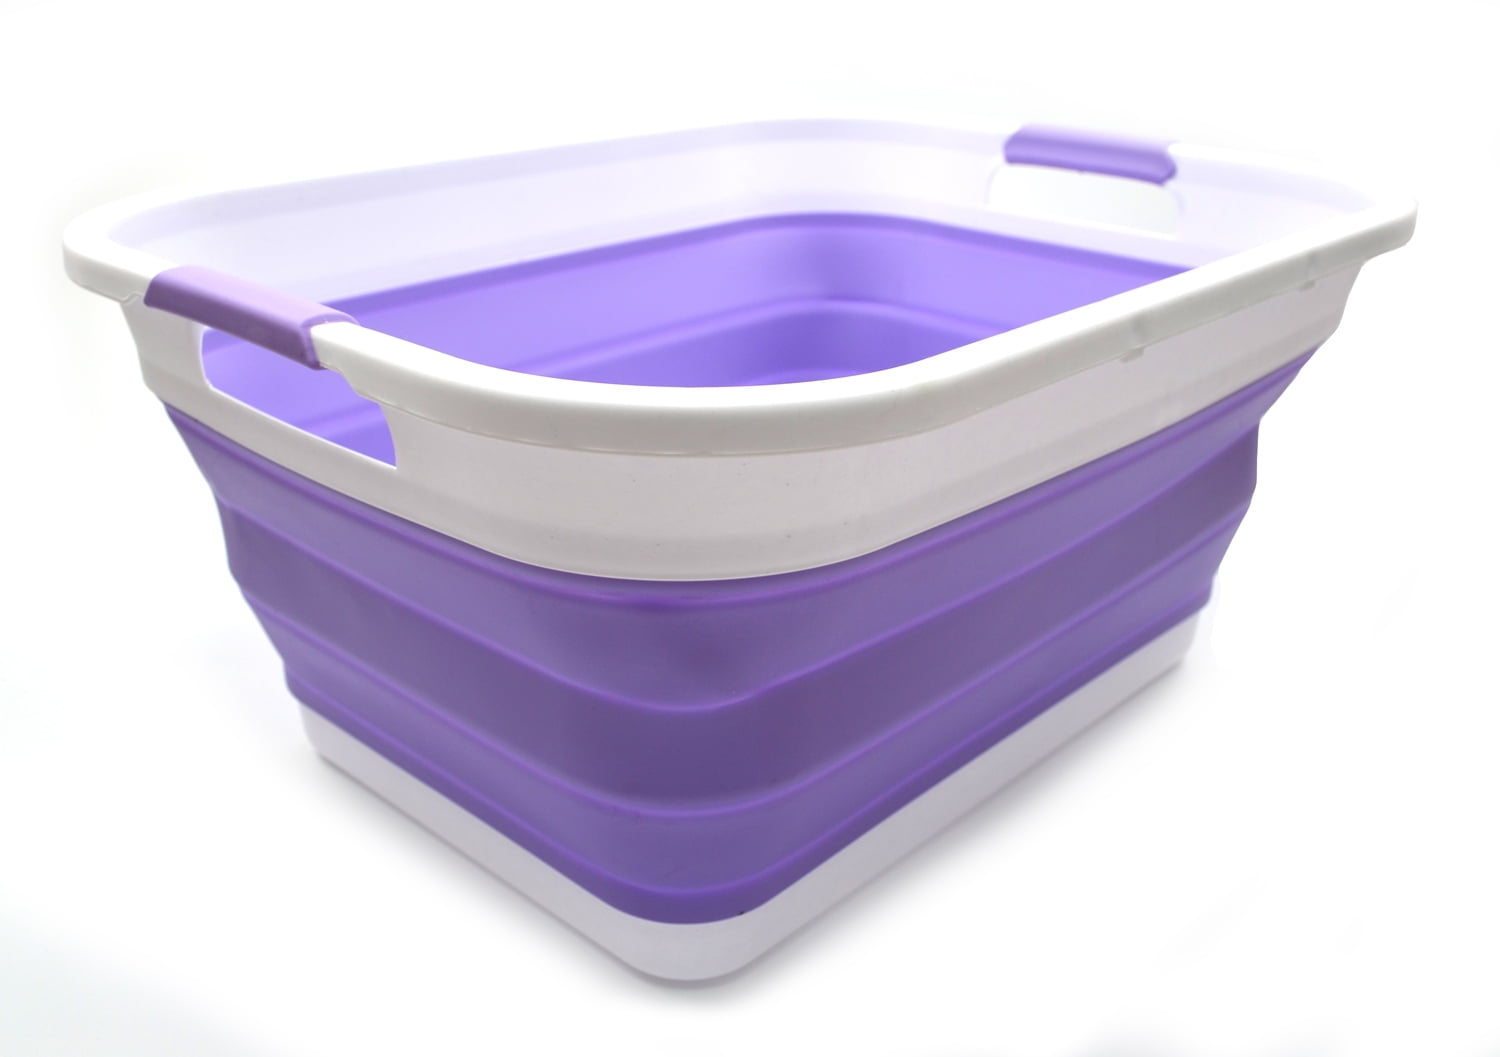 Portable Washing Tub Space Saving Hamper/Basket for Camping Caravan Outdoor Activities Kitchen Ingeniously Collapsible Plastic Laundry Basket Foldable Pop Up Storage Container/Organizer 